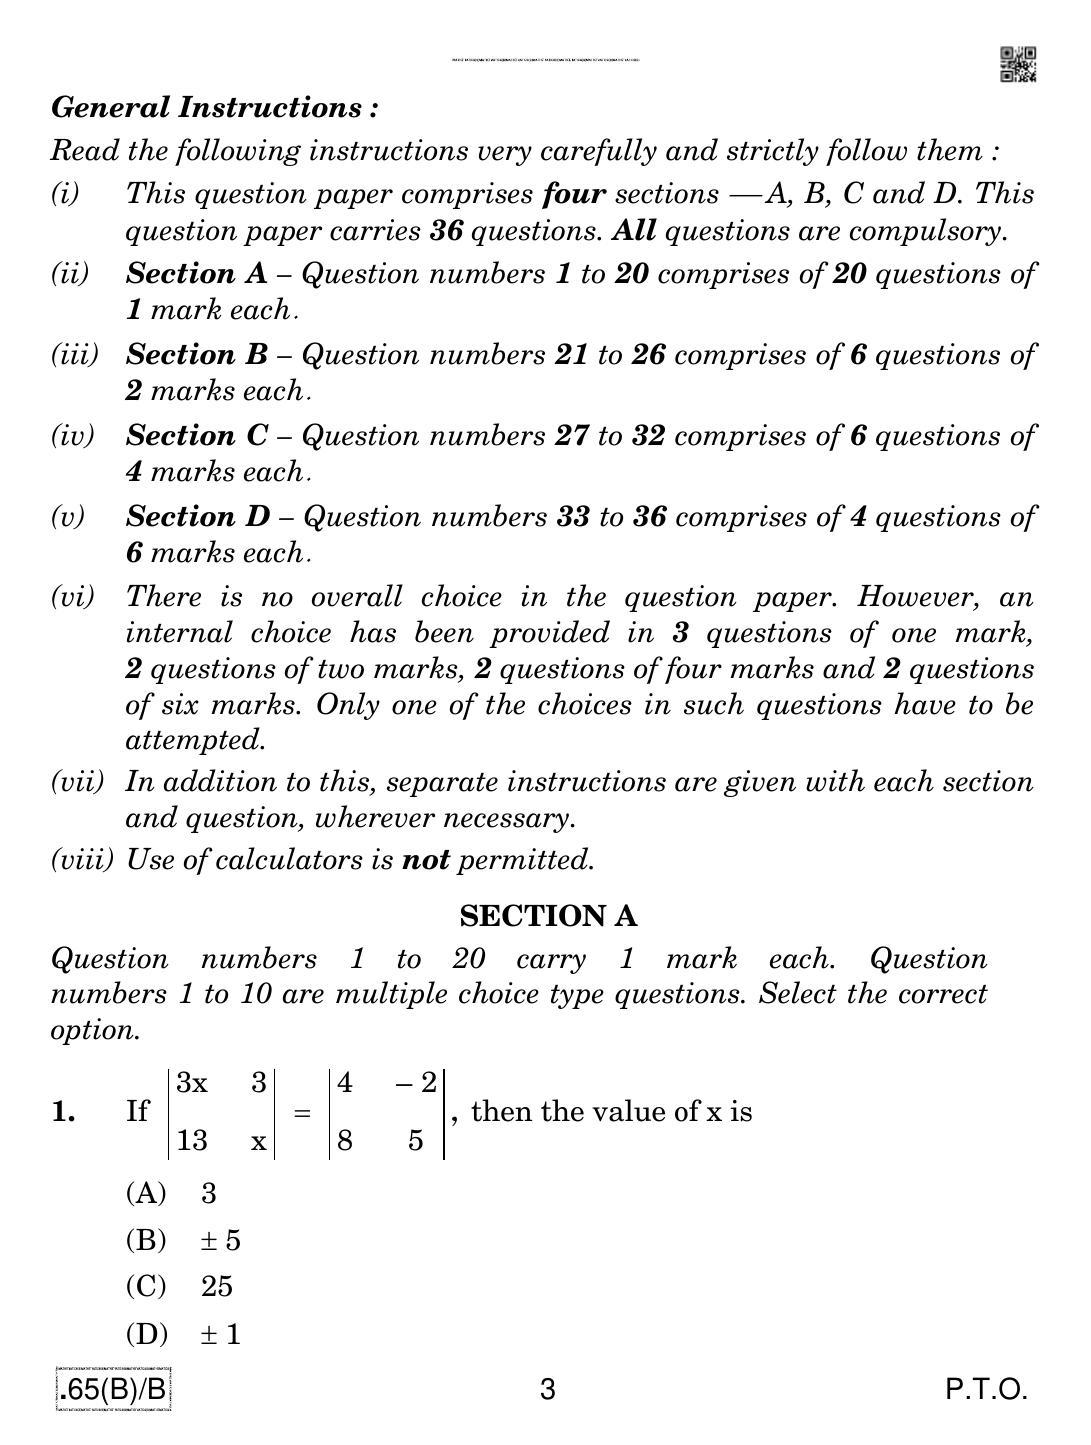 CBSE Class 12 65(B)-C - Maths For Blind Candidates 2020 Compartment Question Paper - Page 3